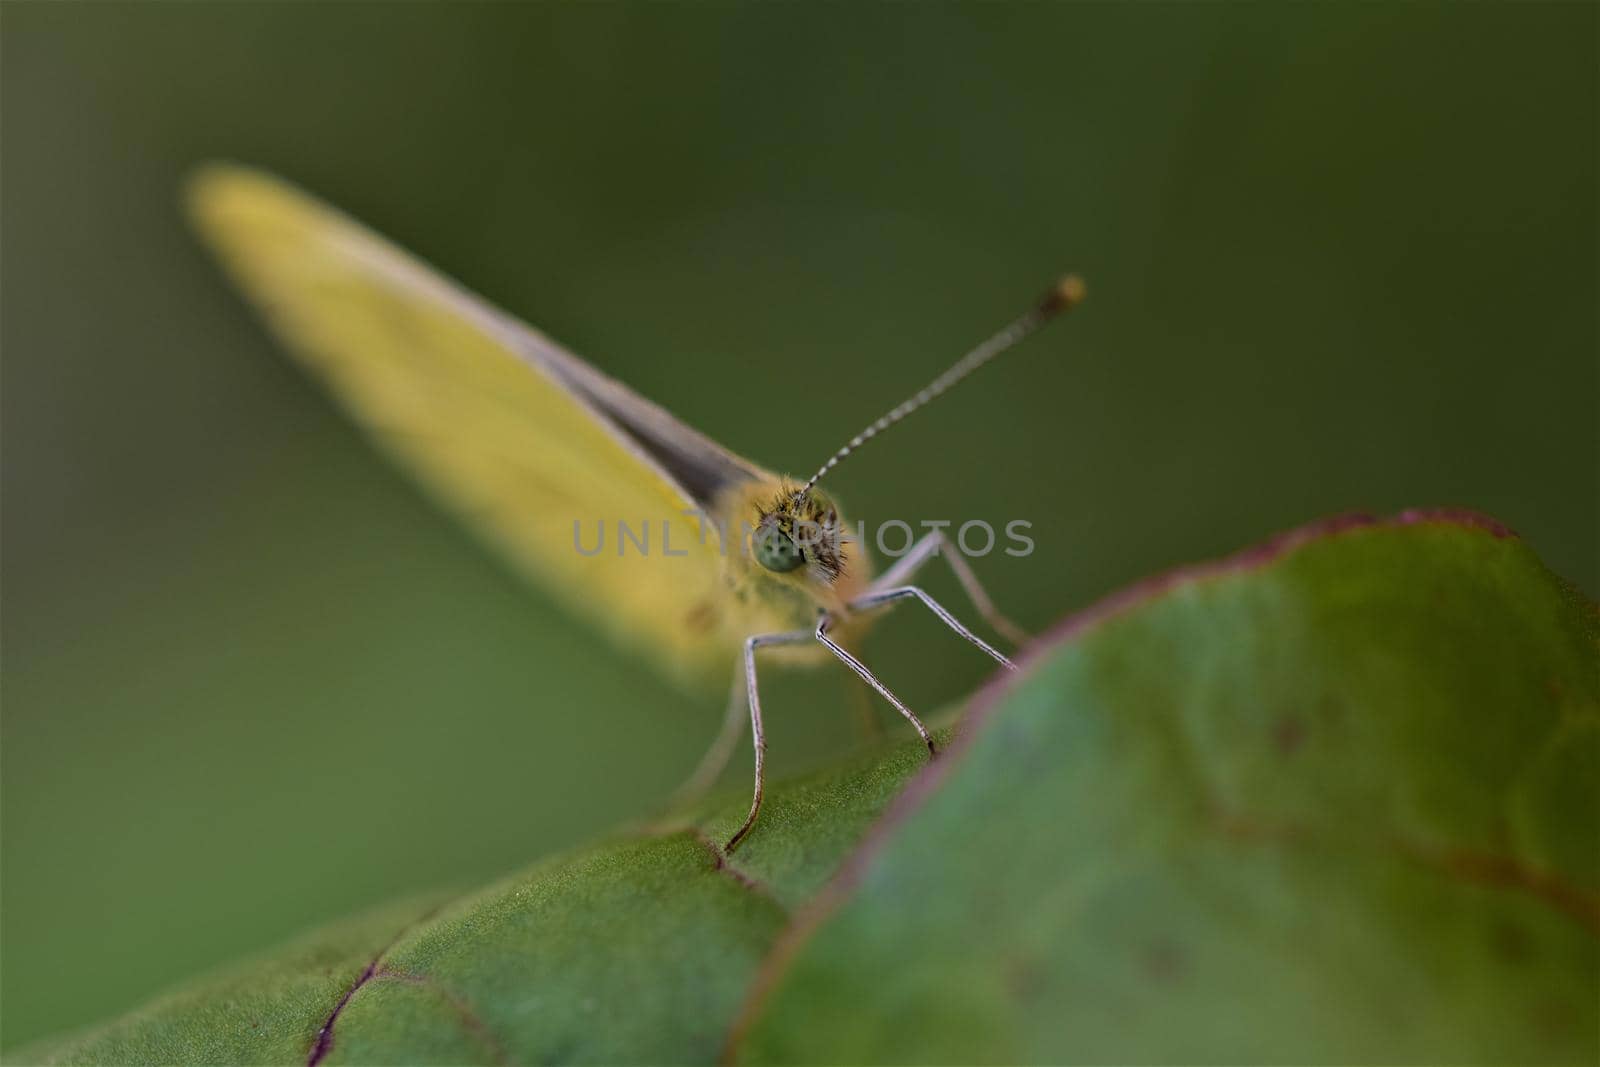 Front view of a pieris rapae butterfly on a beetroot leaf against a blurred background